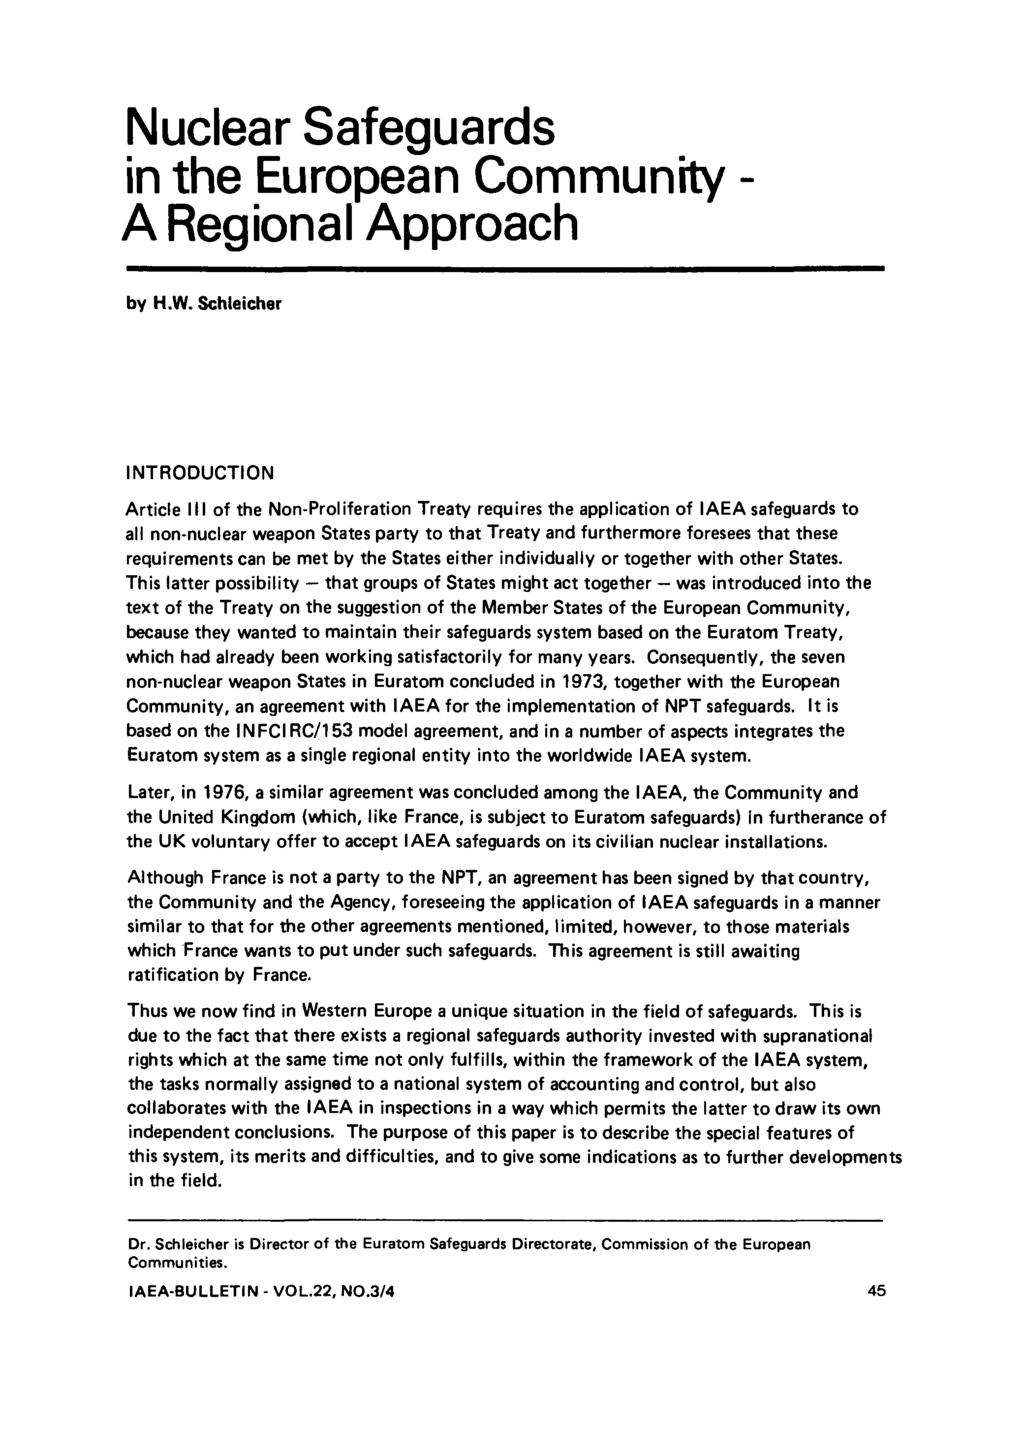 Nuclear Safeguards in the European Community - A Regional Approach by H.W.